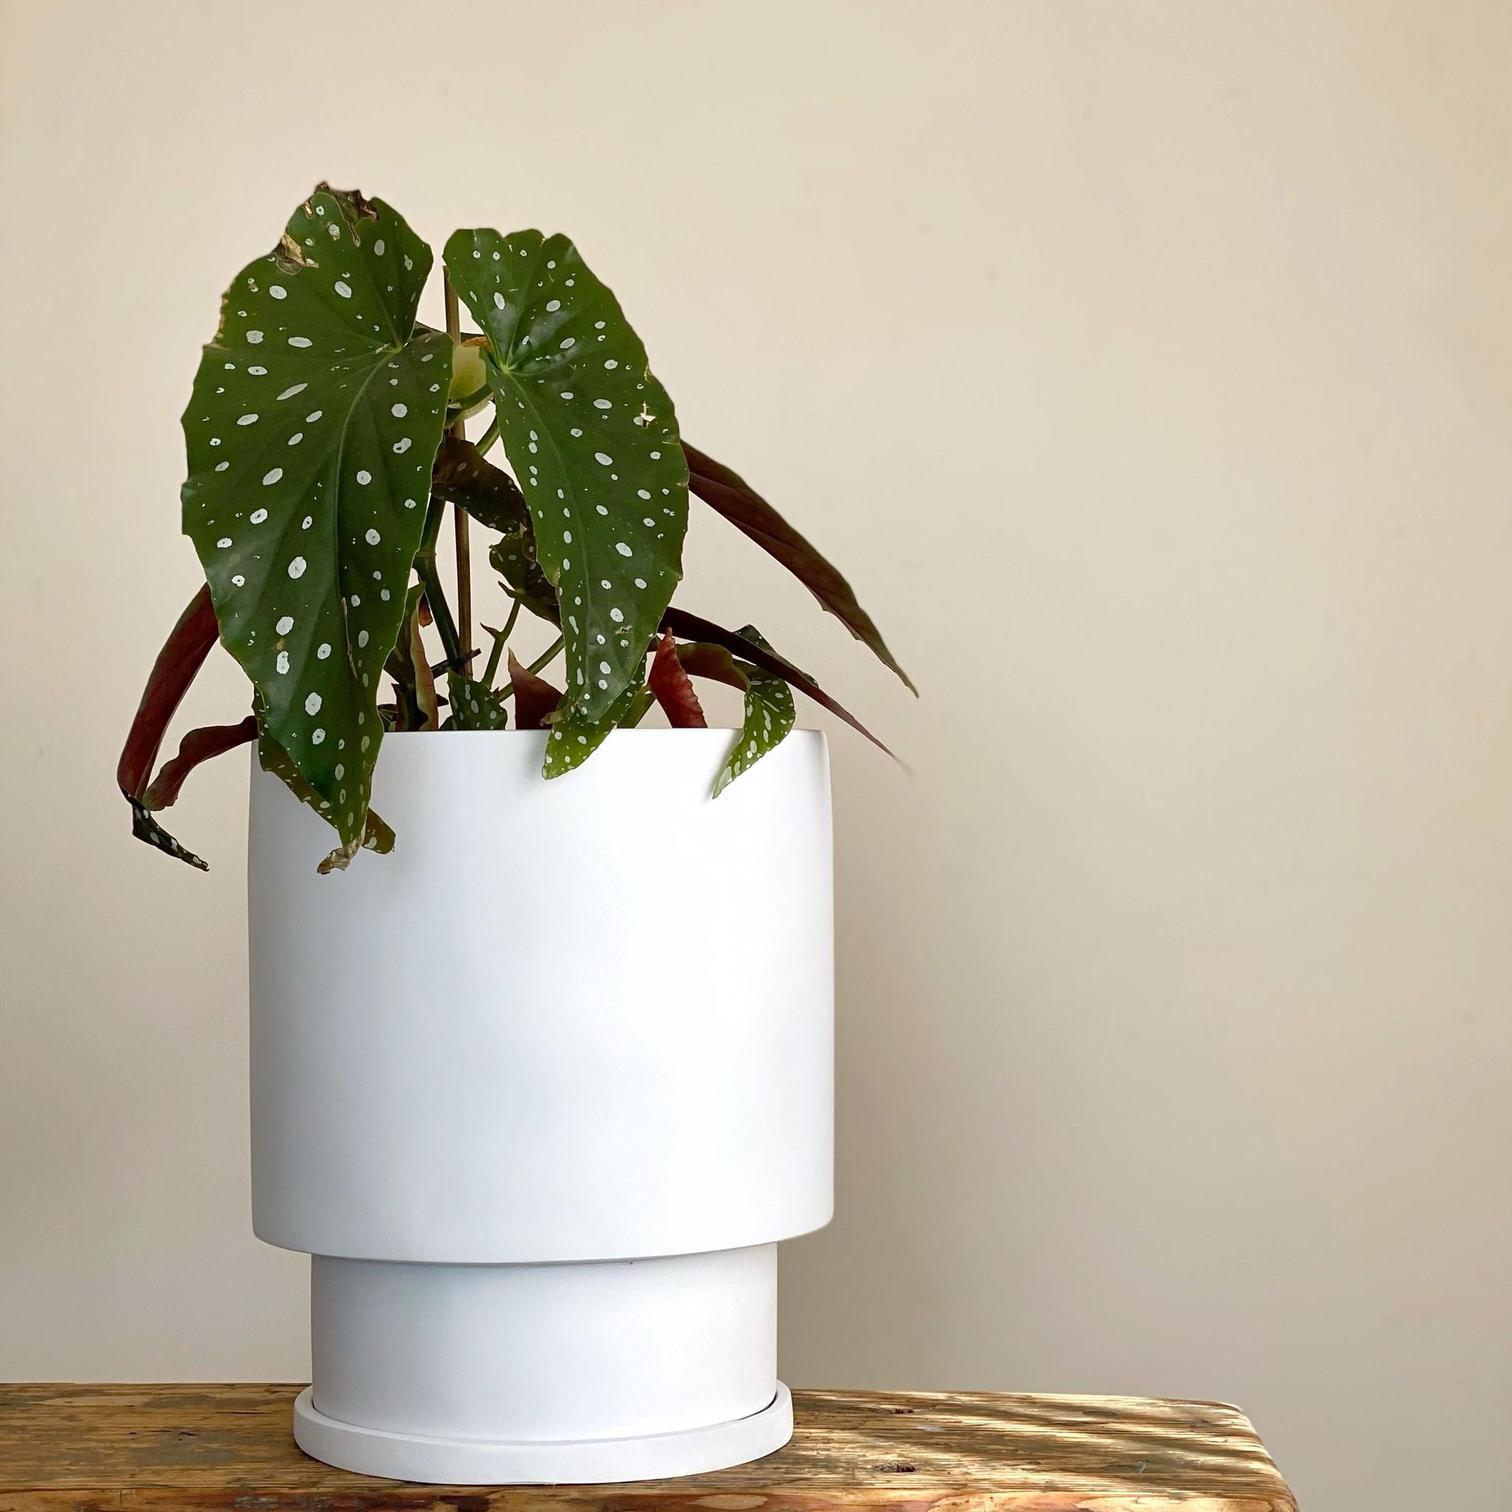 Midi Low Tower Planter - White by the Plant Society x Capra Designs - Toast and honey studio